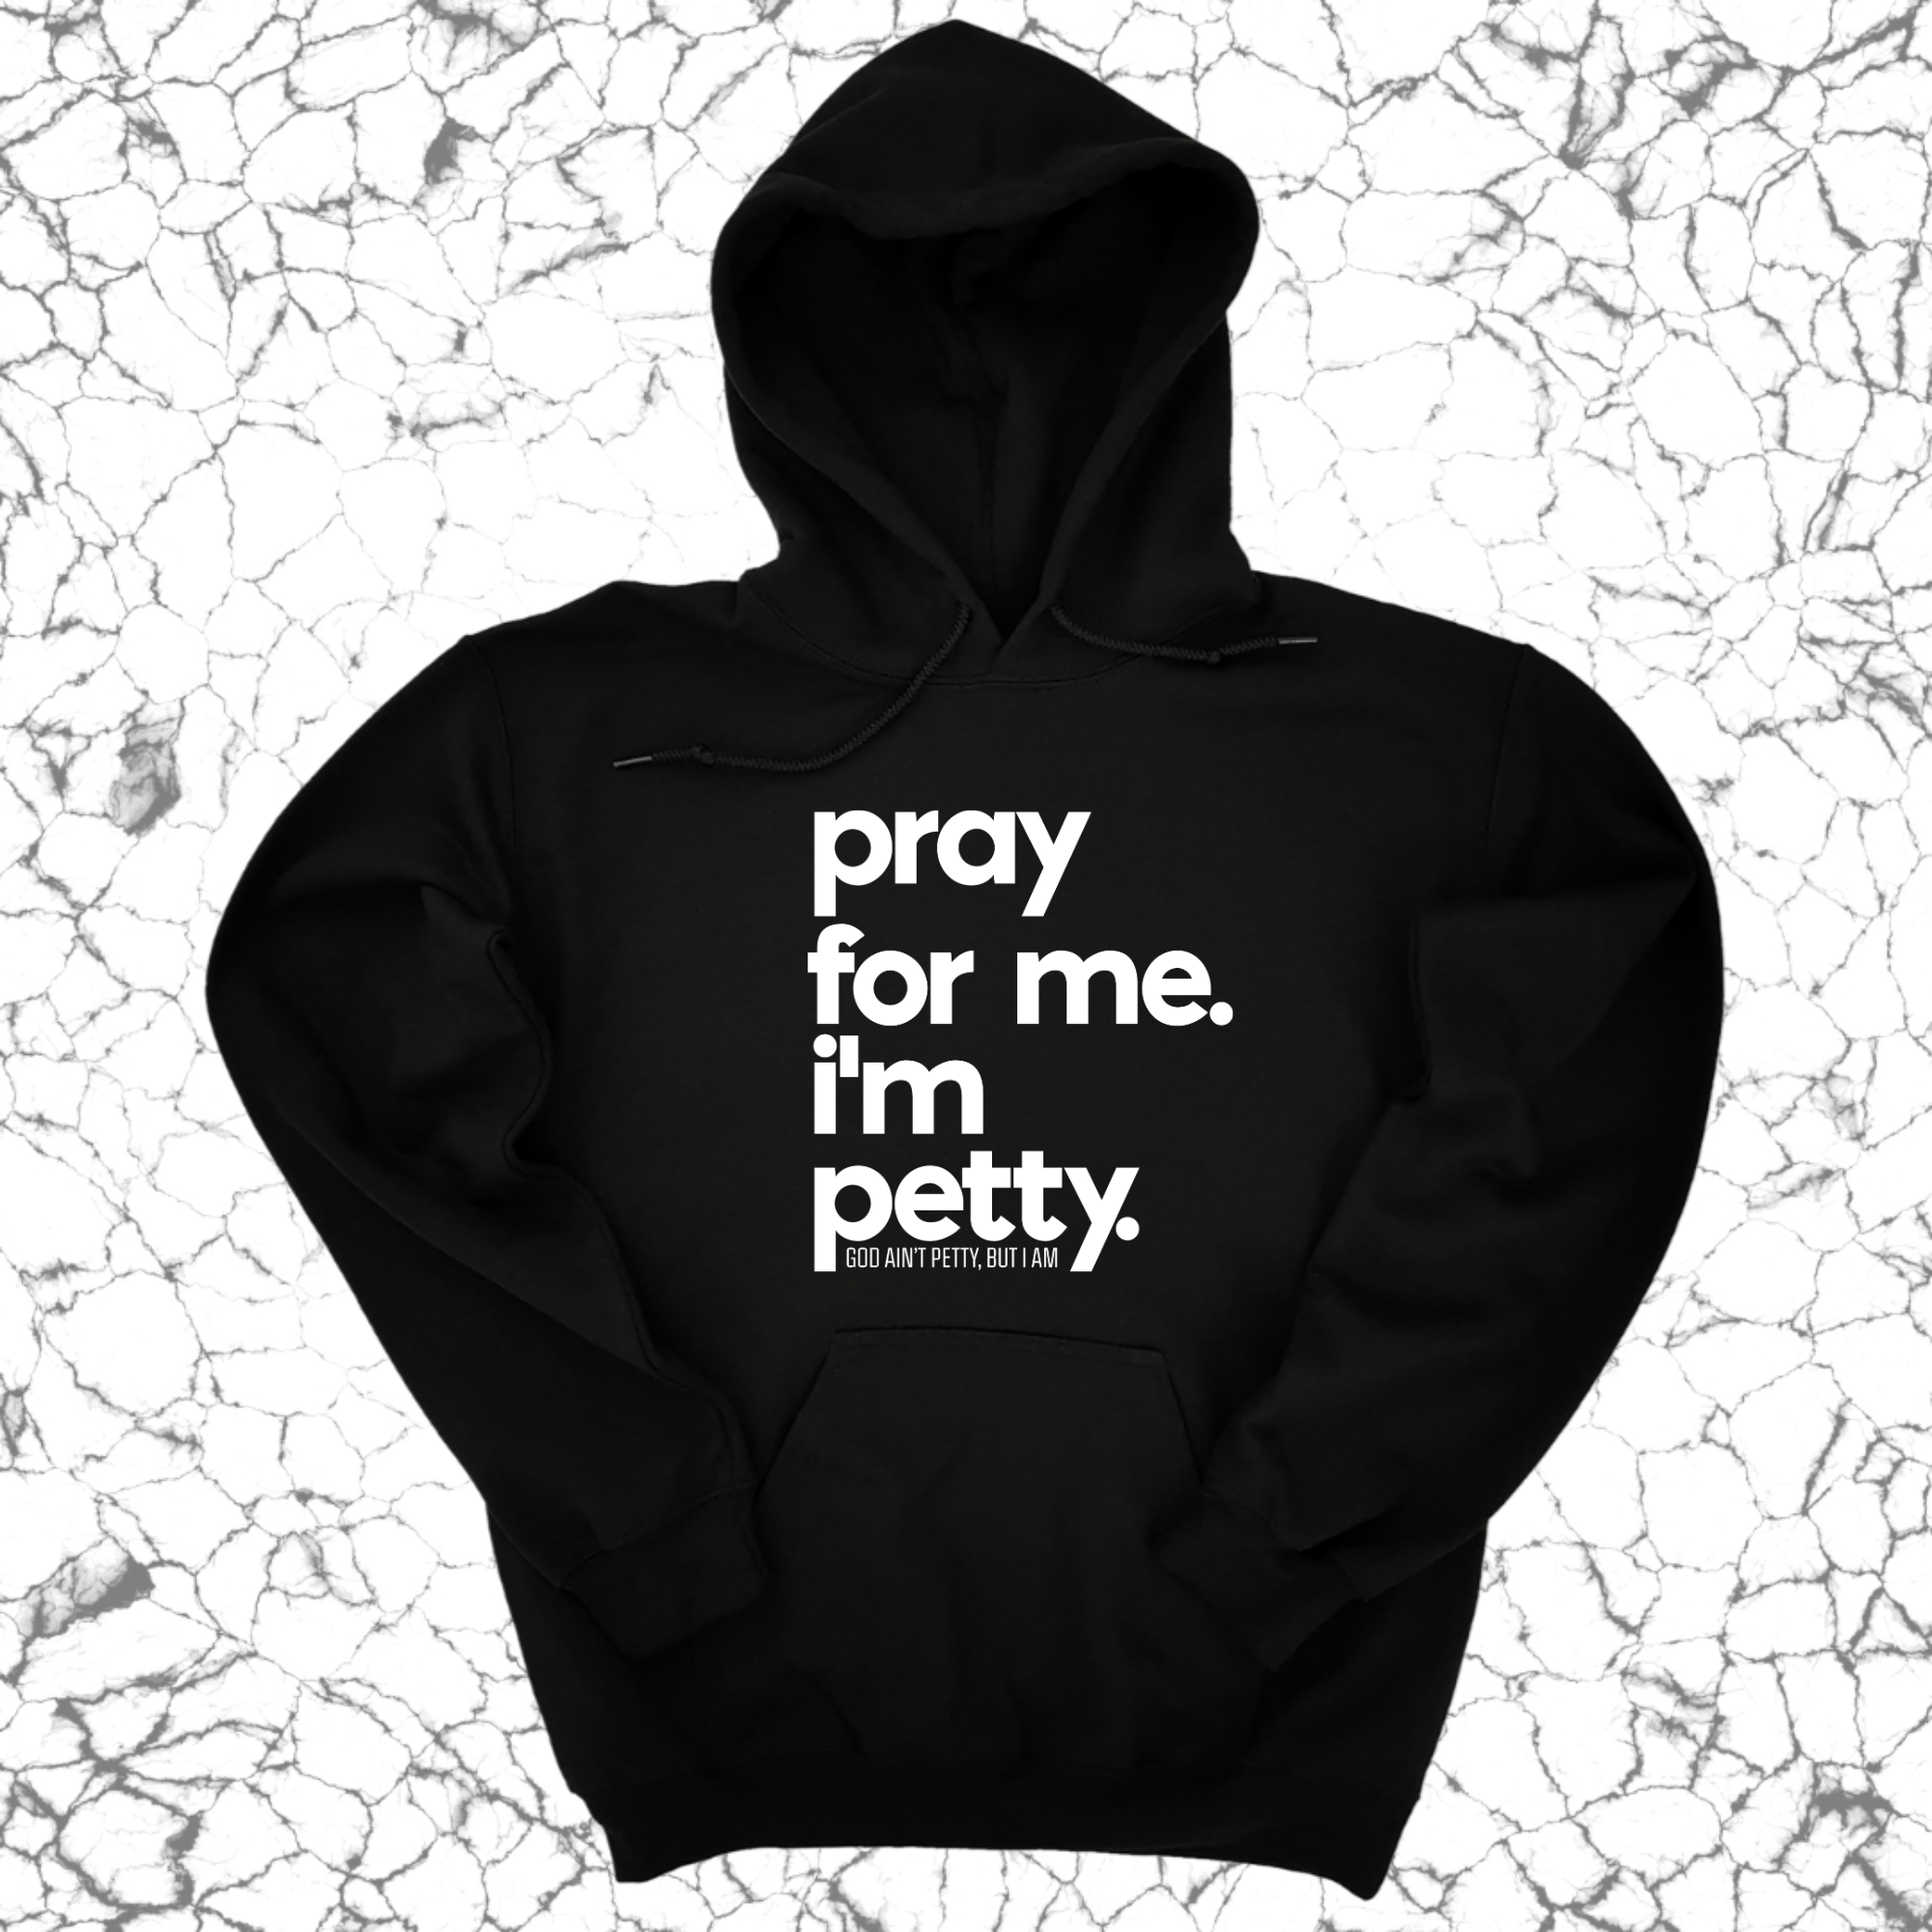 IMPERFECT - PRAY FOR ME I'M PETTY HOODIE BLACK/WHITE LARGE-The Original God Ain't Petty But I Am